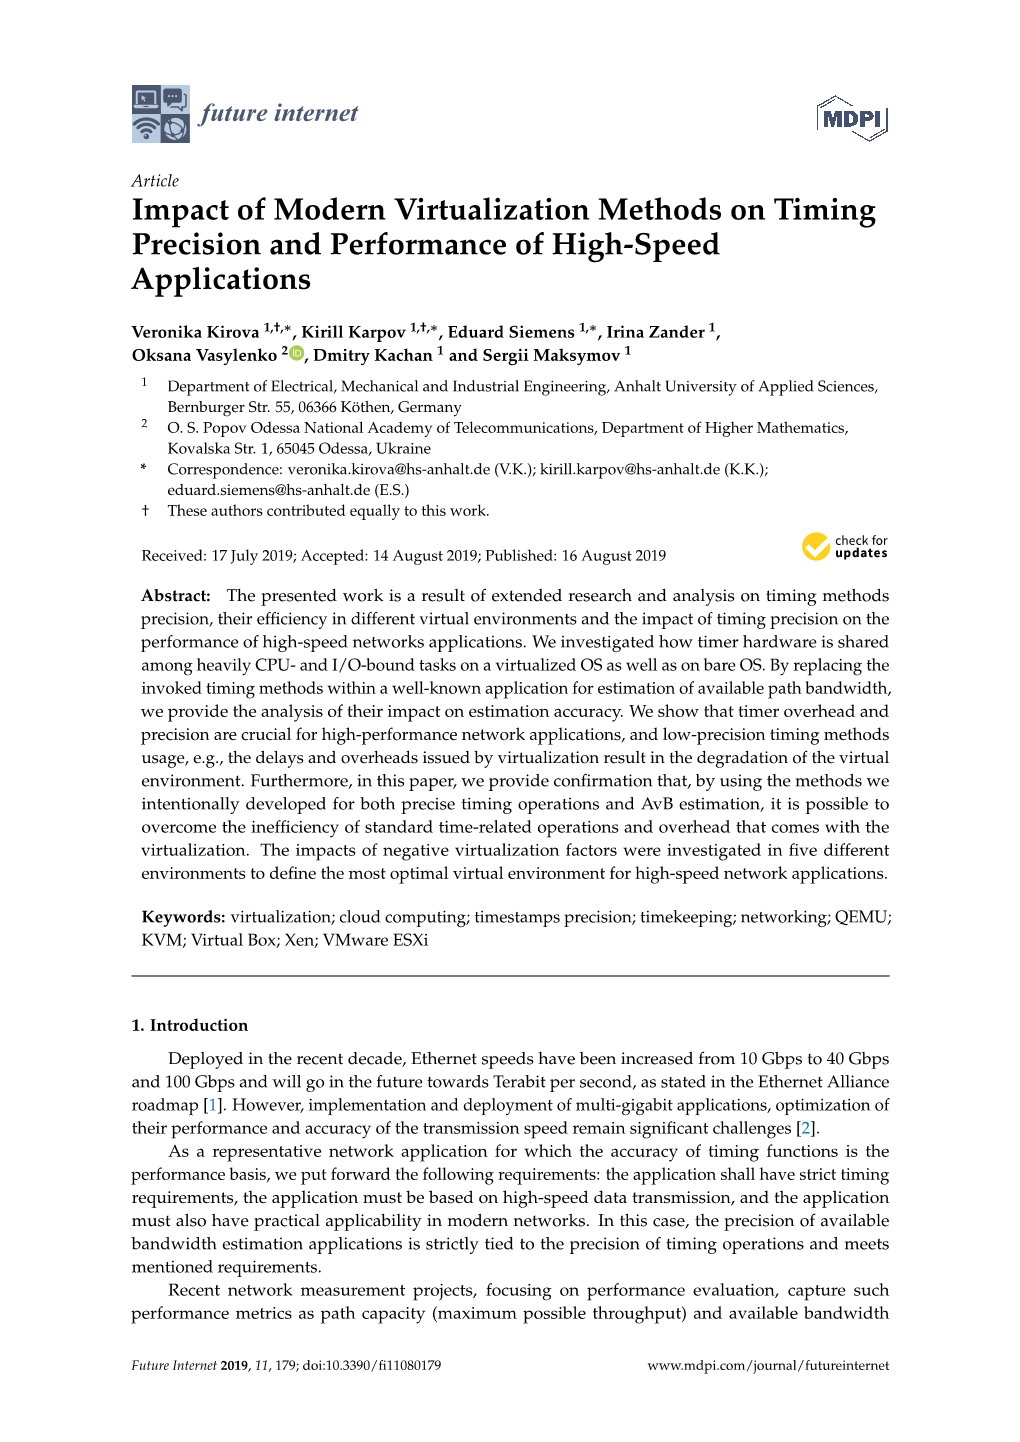 Impact of Modern Virtualization Methods on Timing Precision and Performance of High-Speed Applications